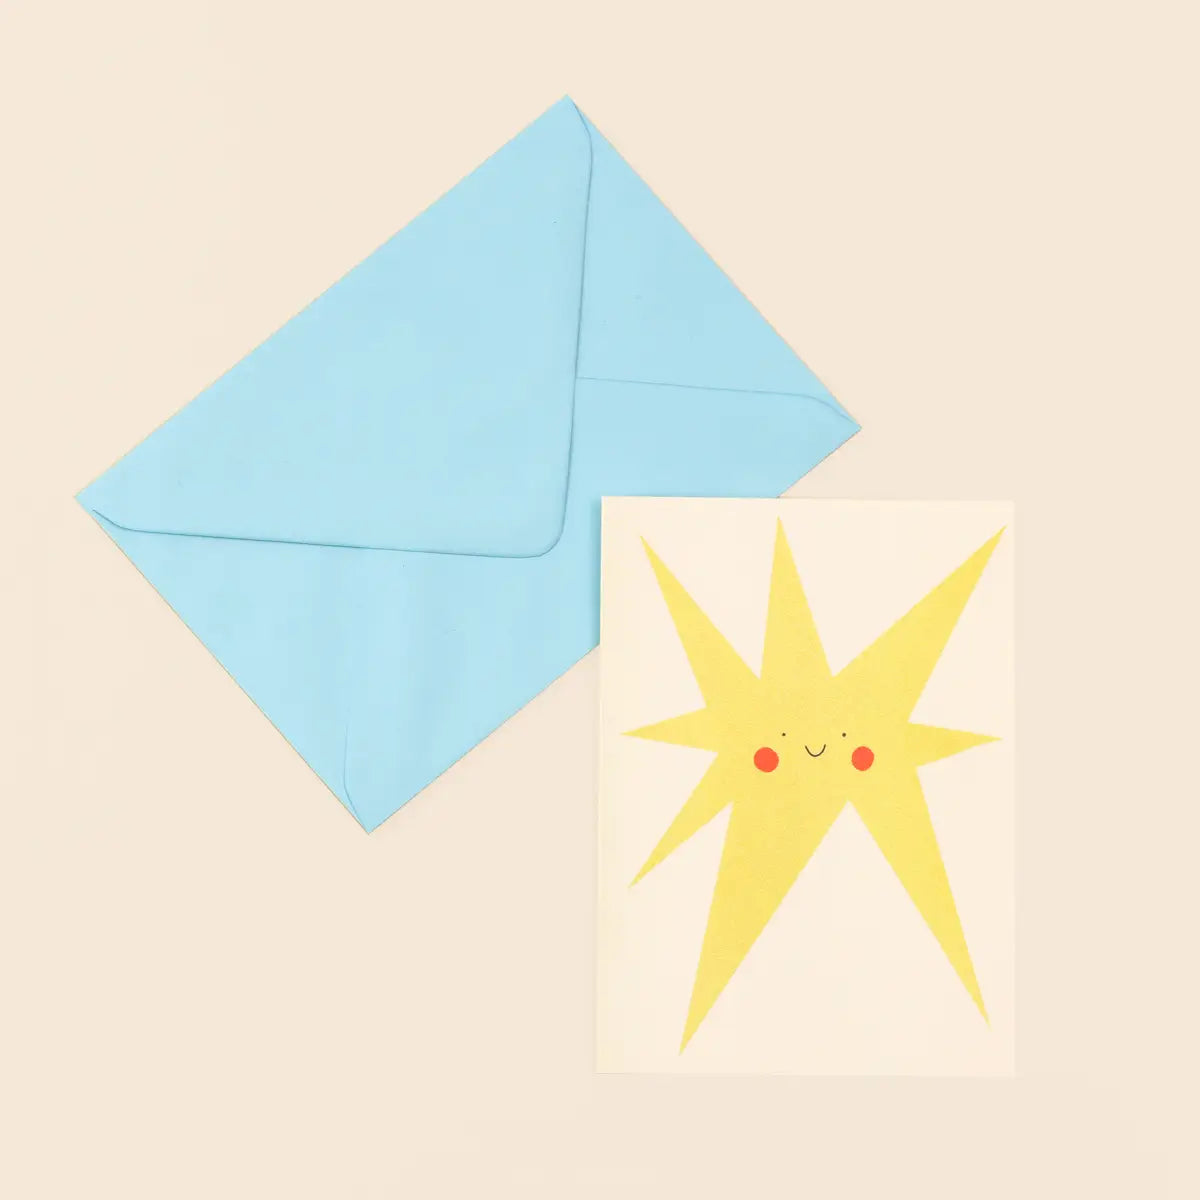 Smiley Star Face Greeting Card